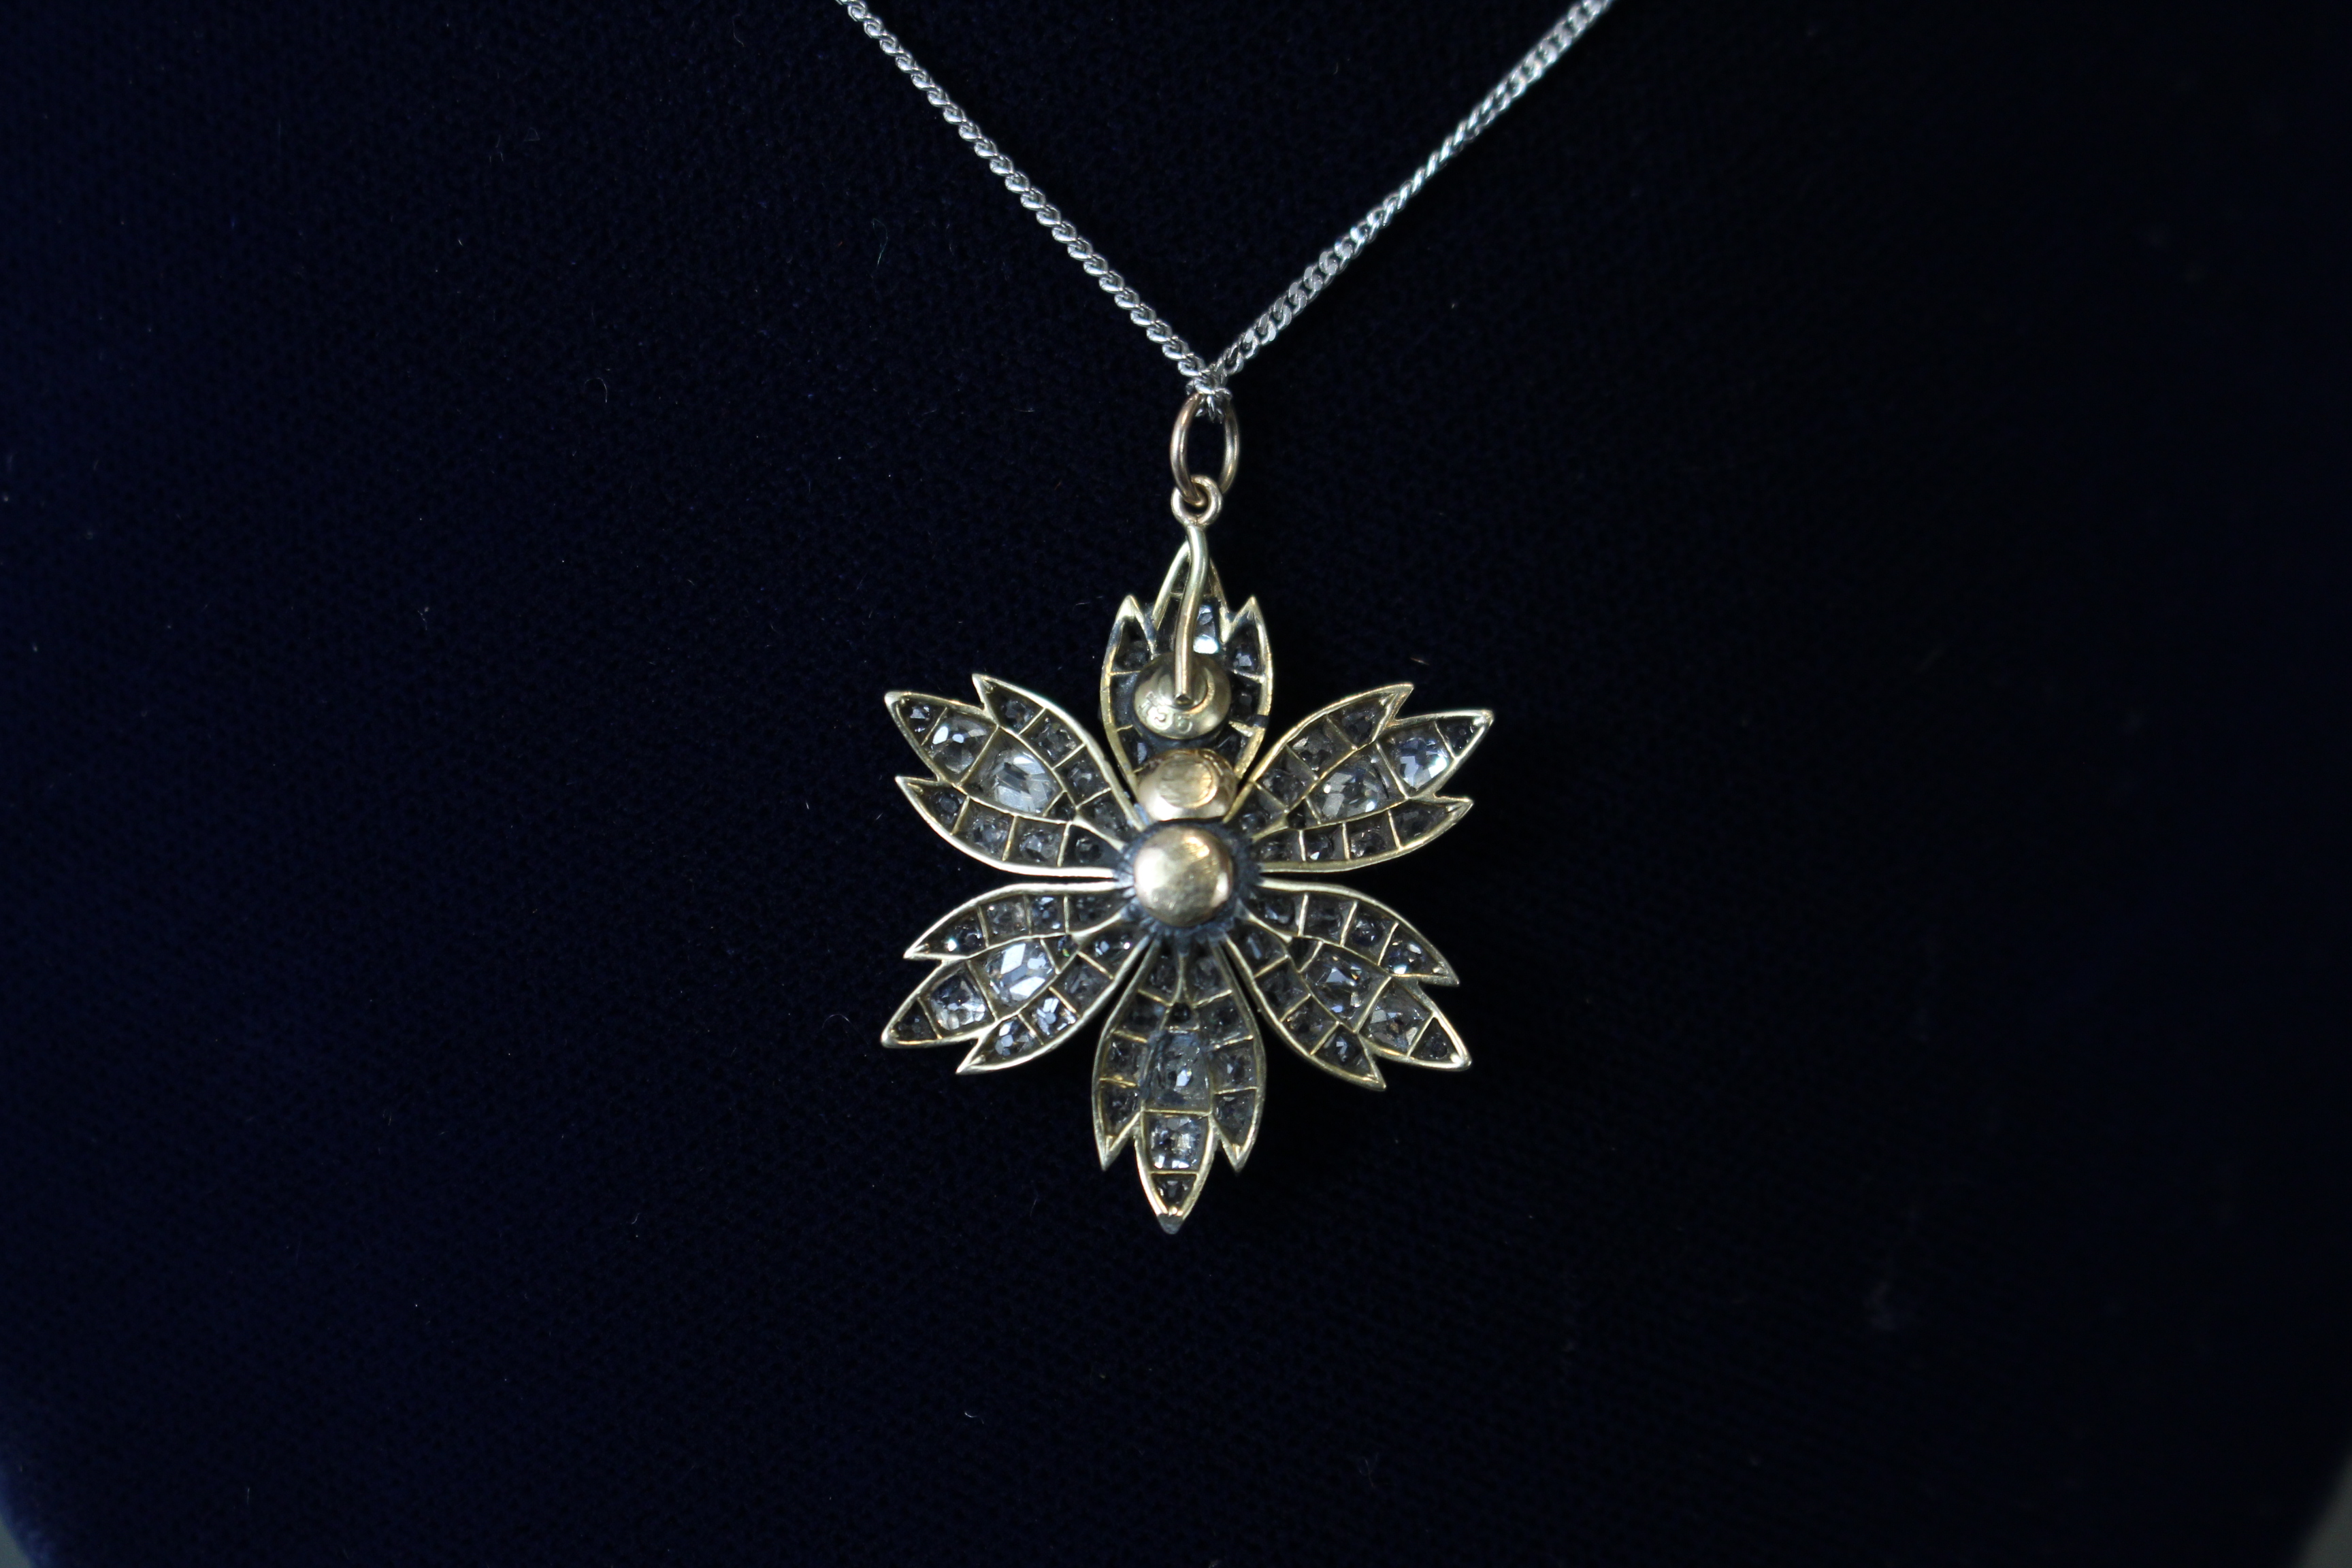 A DIAMOND FLOWER-HEAD PENDANT, the centre stone approximately 0.5 carat, surrounded by six petals - Image 4 of 5